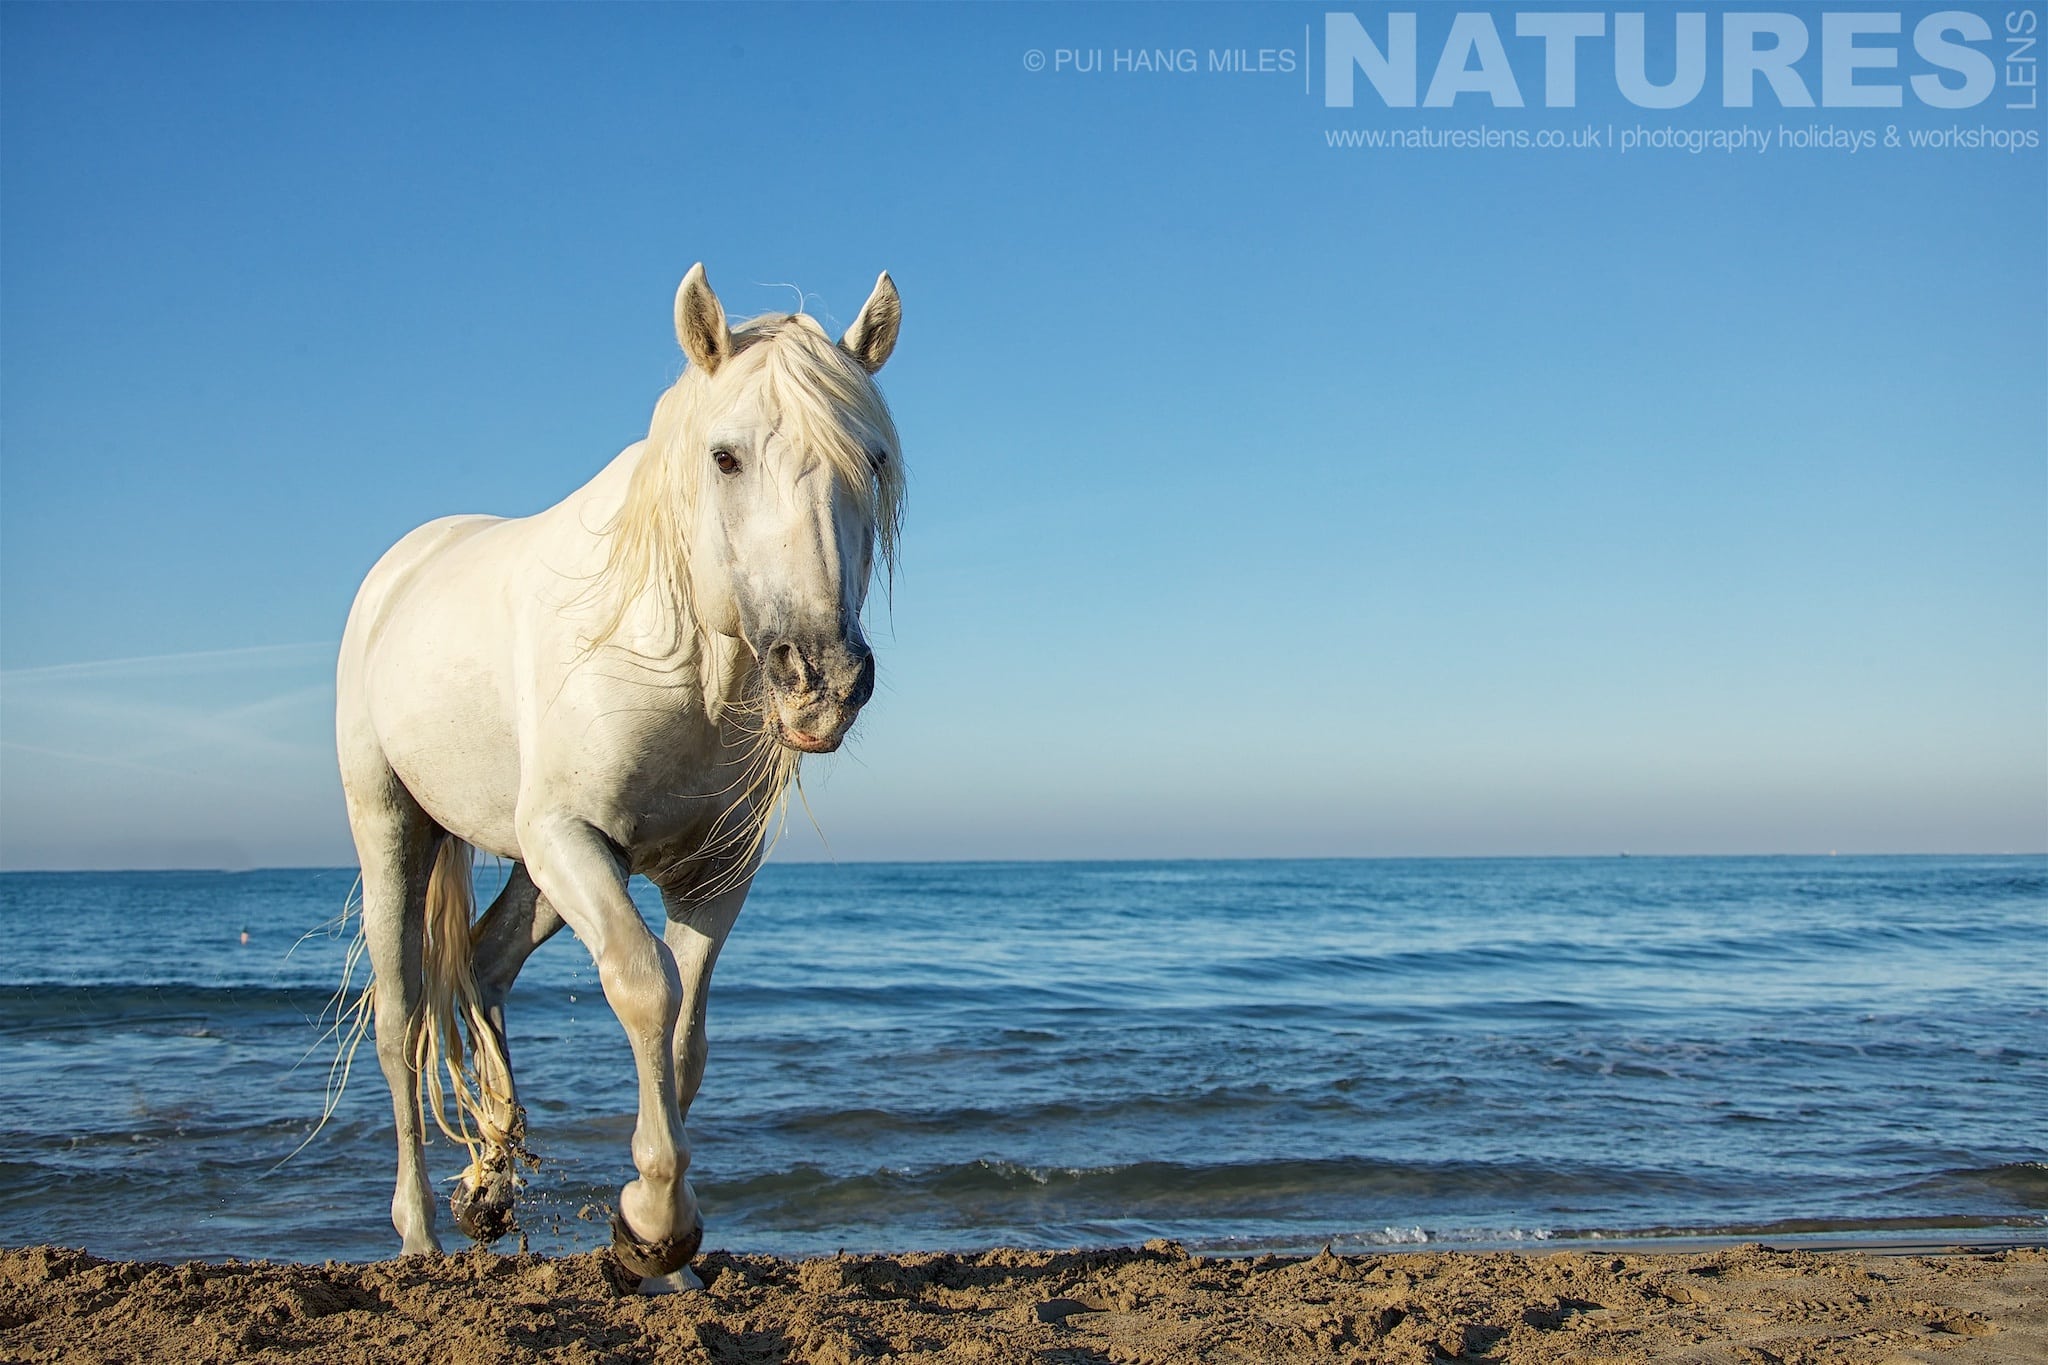 An inquisitive stallion walks up the beach as photographed during the NaturesLens White Horses of the Camargue Photography Holiday